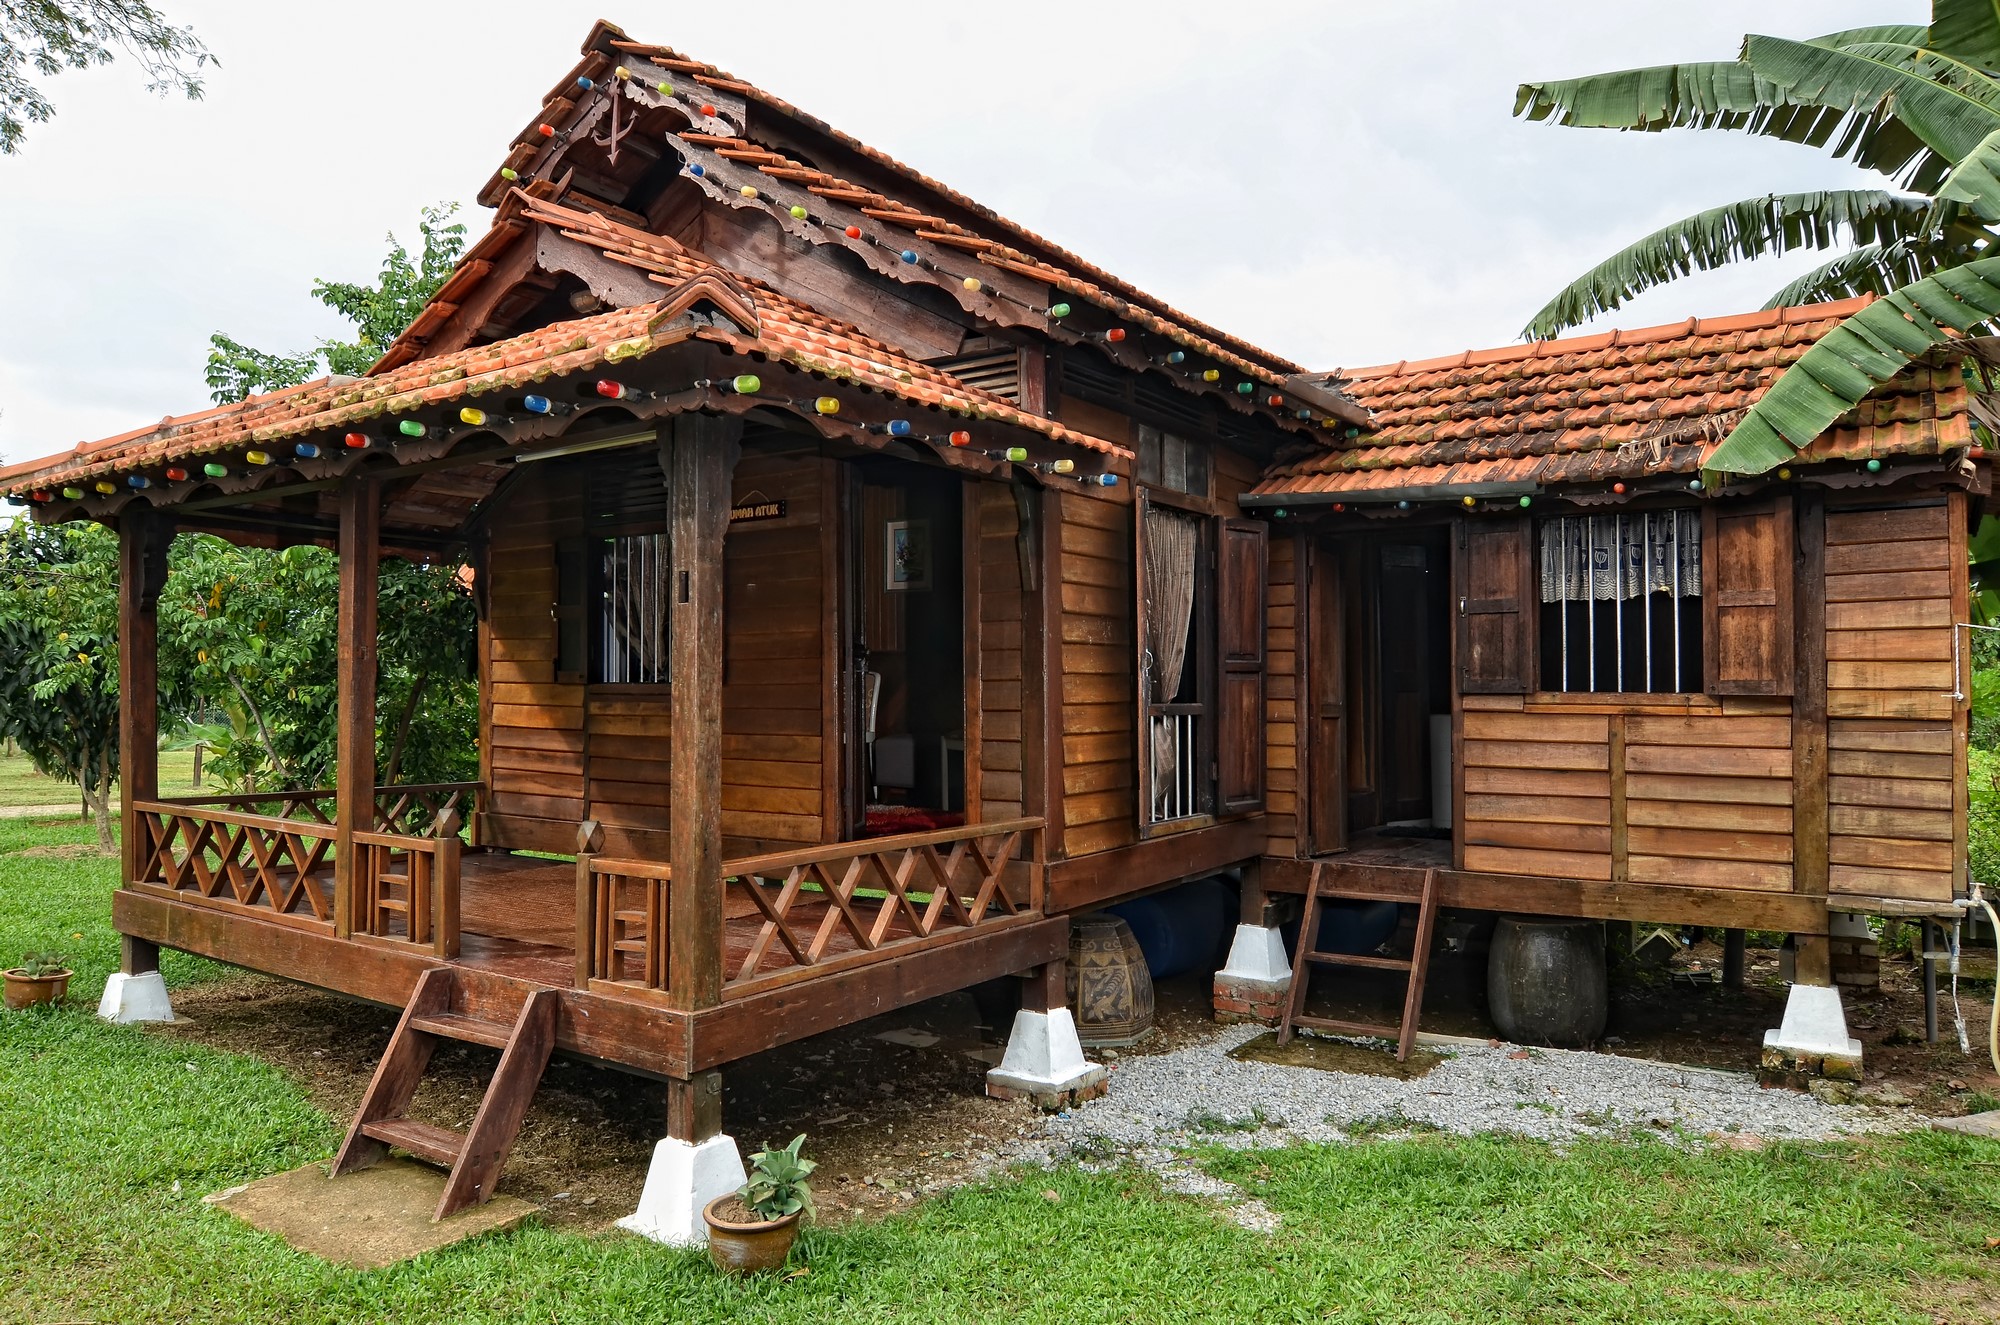 Desa Balqis Features Traditional Malay Houses By The Beach